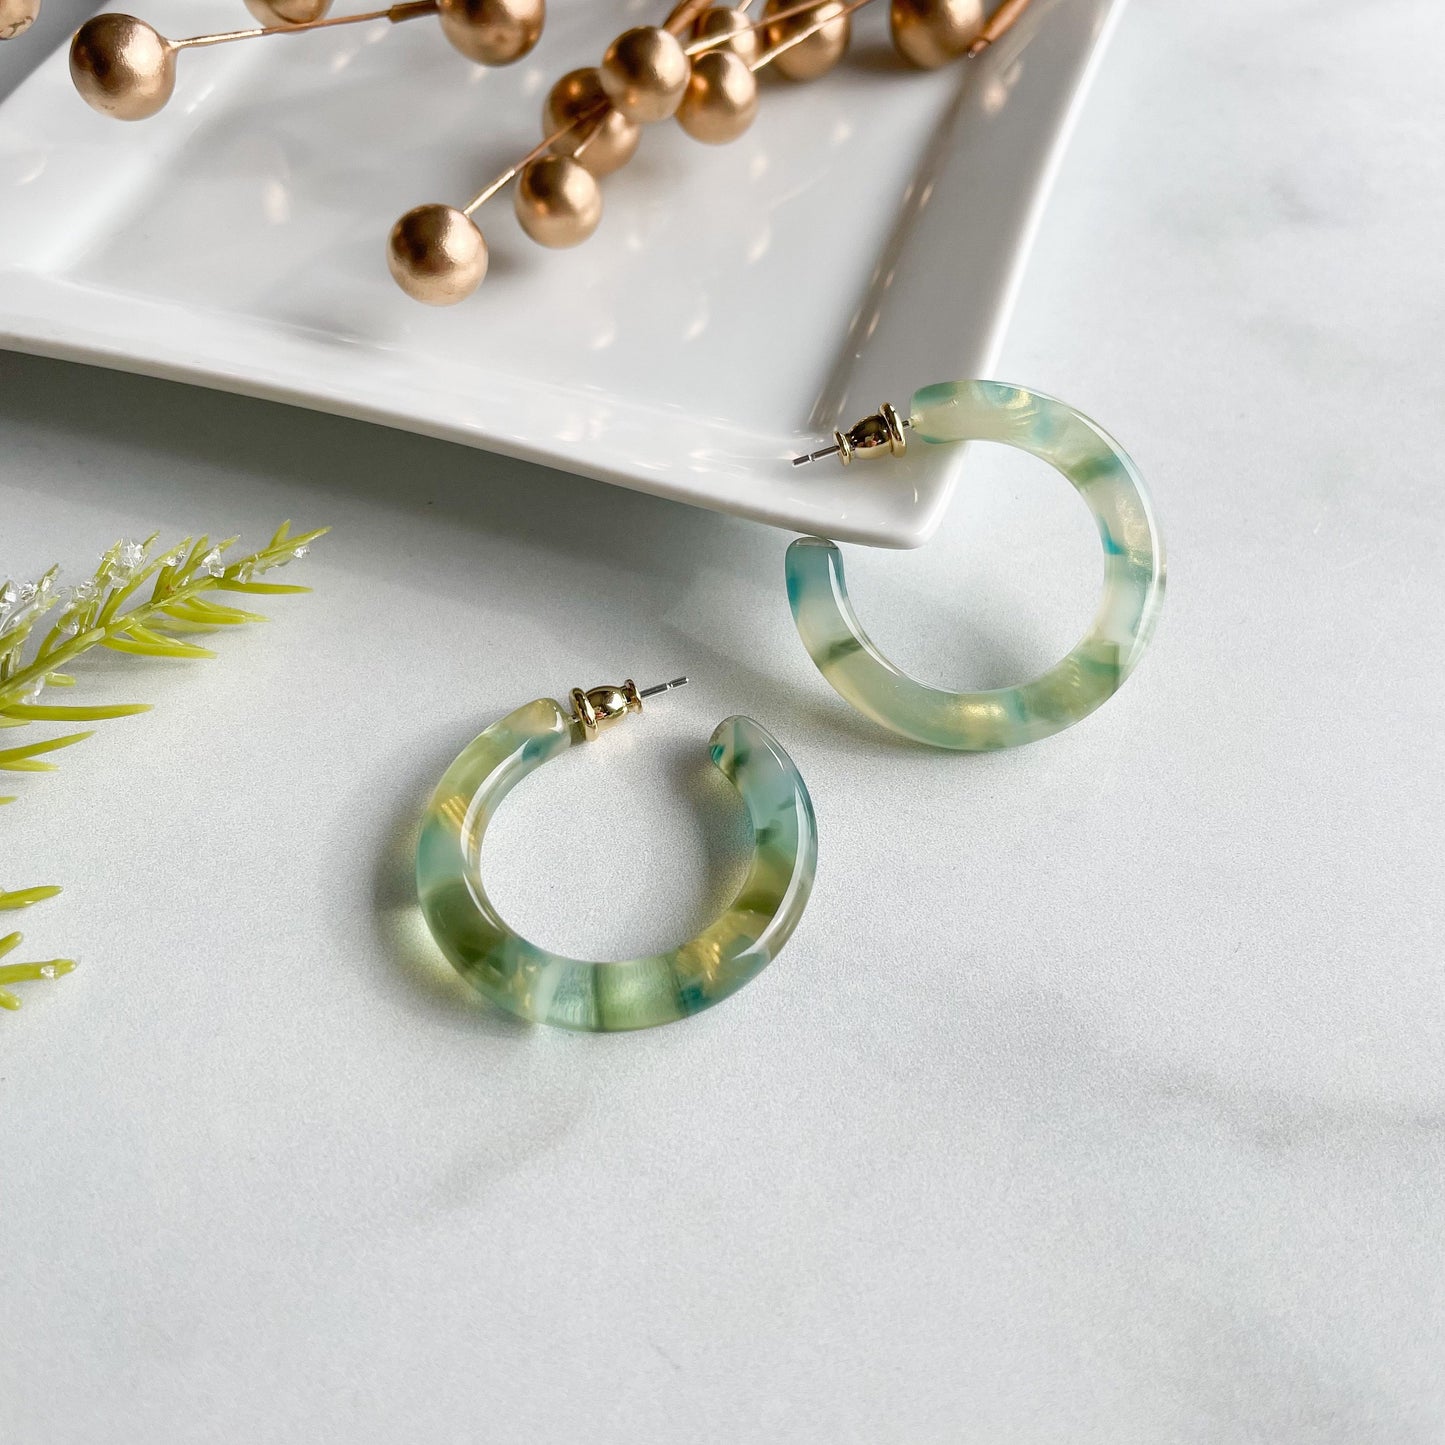 35mm Round Hoops in Dew Drop | Green Thick Chunky Hoop Earrings Cellulose Acetate Colorful Statement 925 Sterling Silver Posts